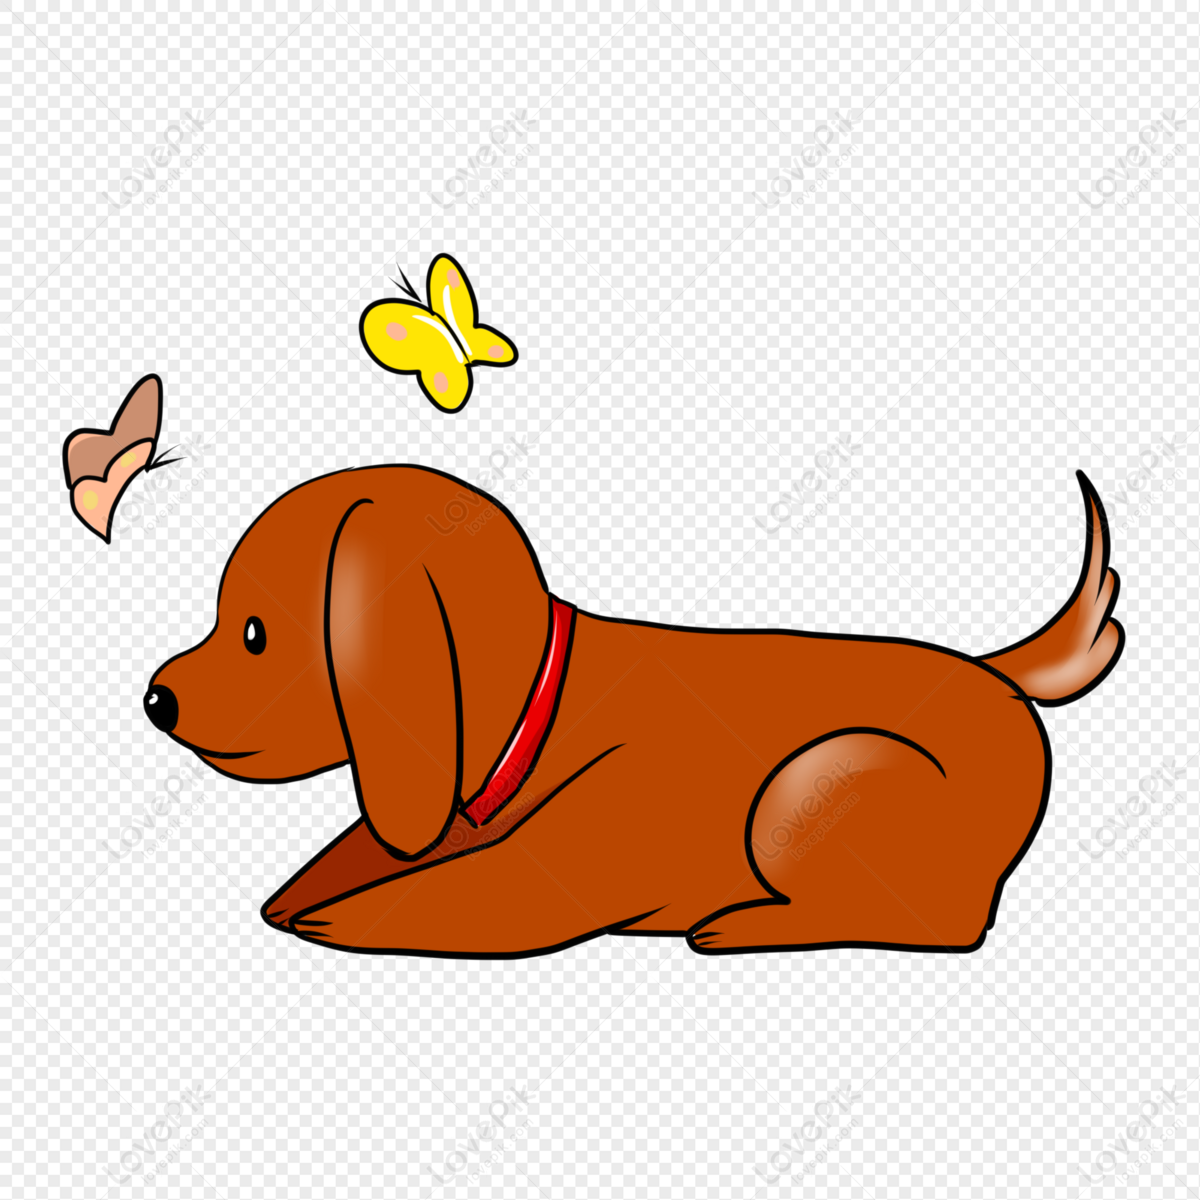 Rhubarb Dog PNG Hd Transparent Image And Clipart Image For Free Download -  Lovepik | 401367474